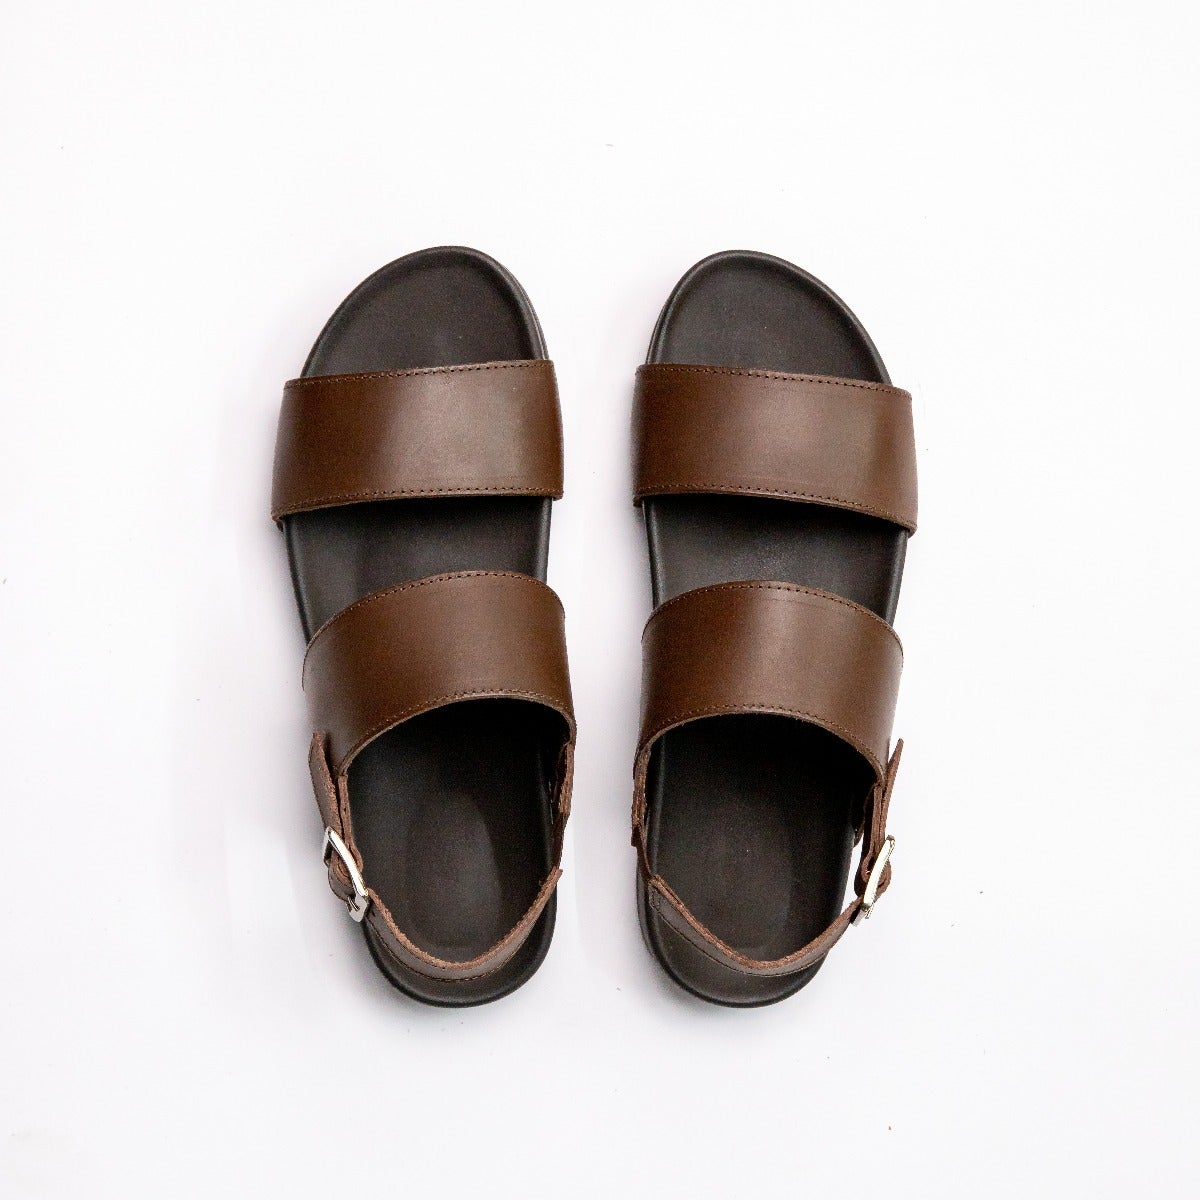 Tuscan Leather Double Strap Sandal in Brown